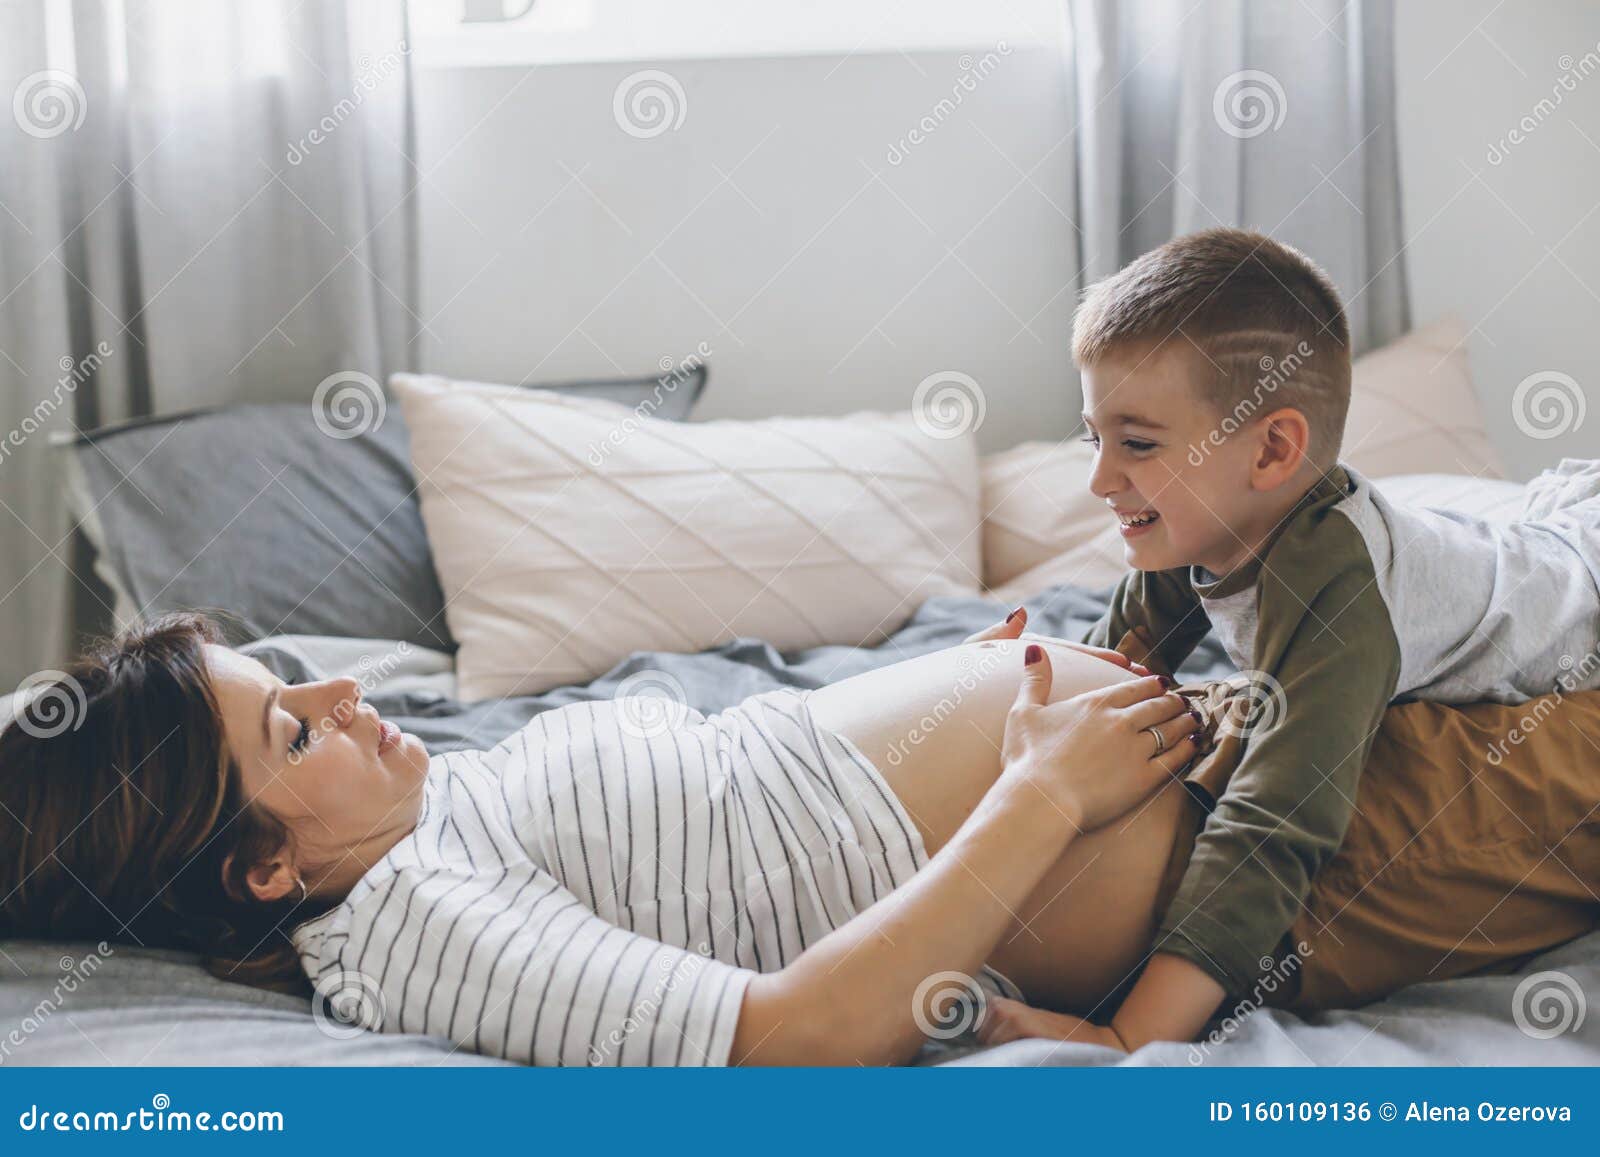 Mom And Son Share Bed Pregnant Mom Playing with Child in Bedroom Stock Photo - Image of pregnant,  morning: 160109136